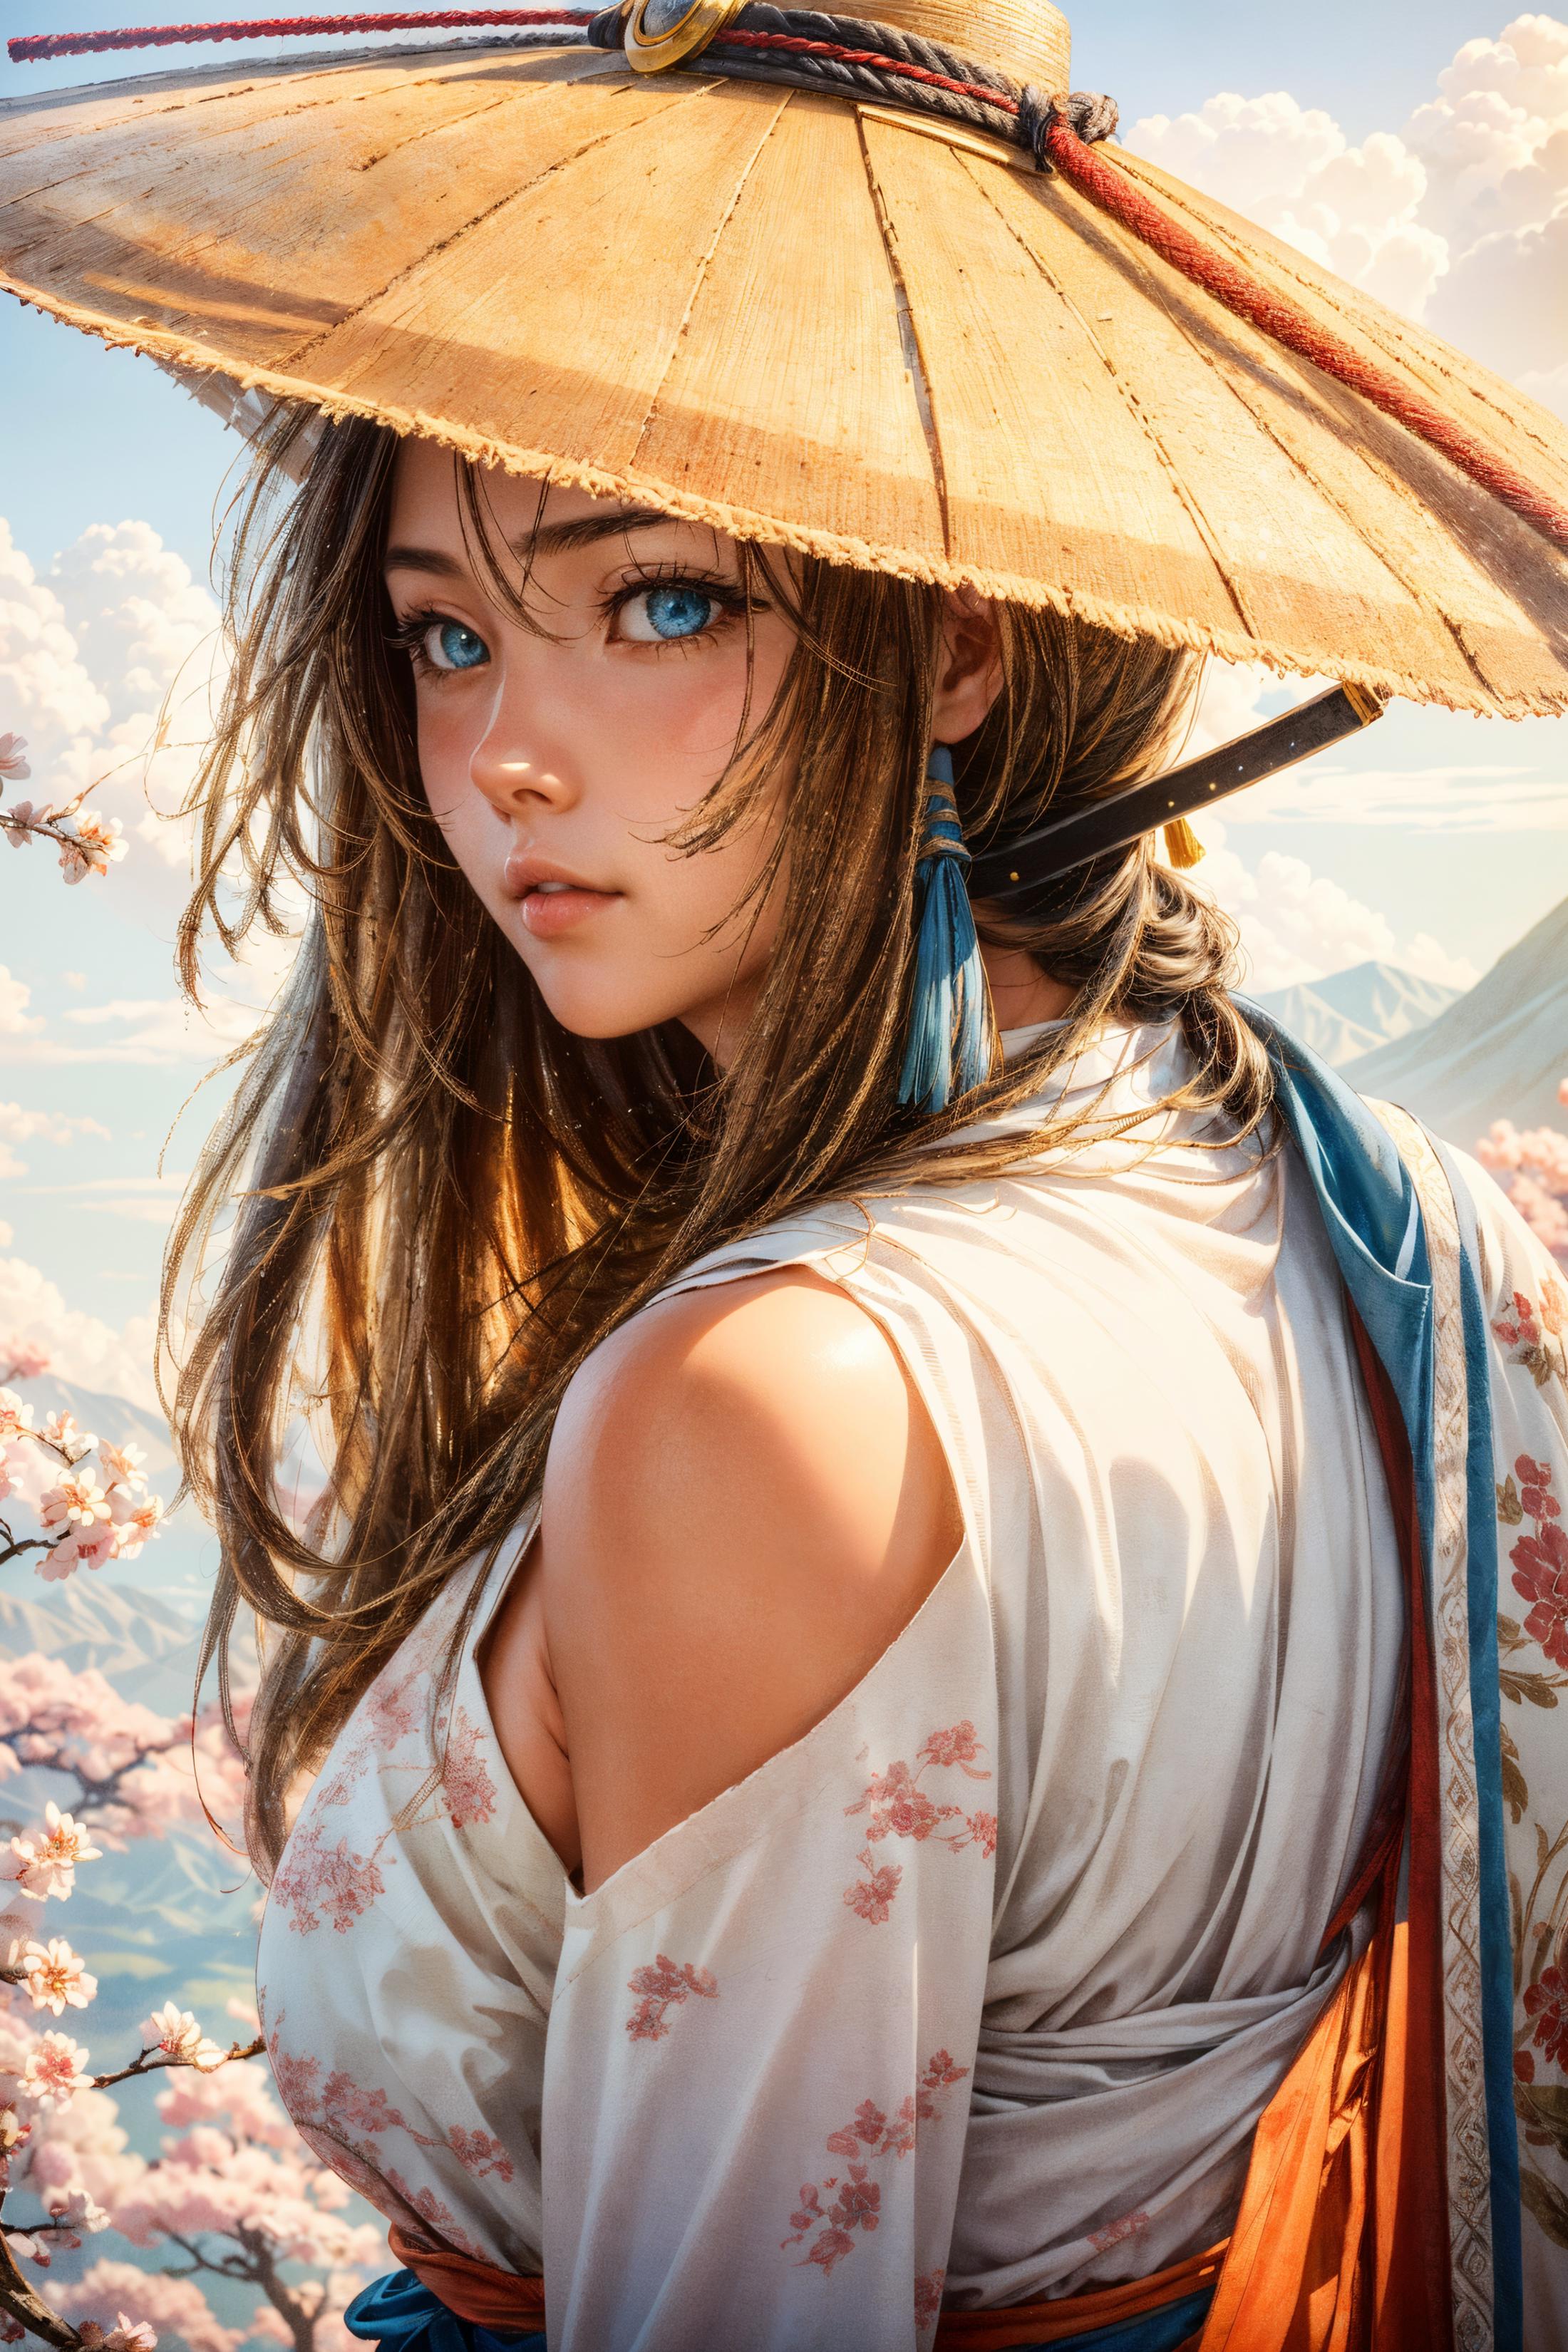 A beautifully drawn illustration of a woman wearing a traditional Asian dress and hat.